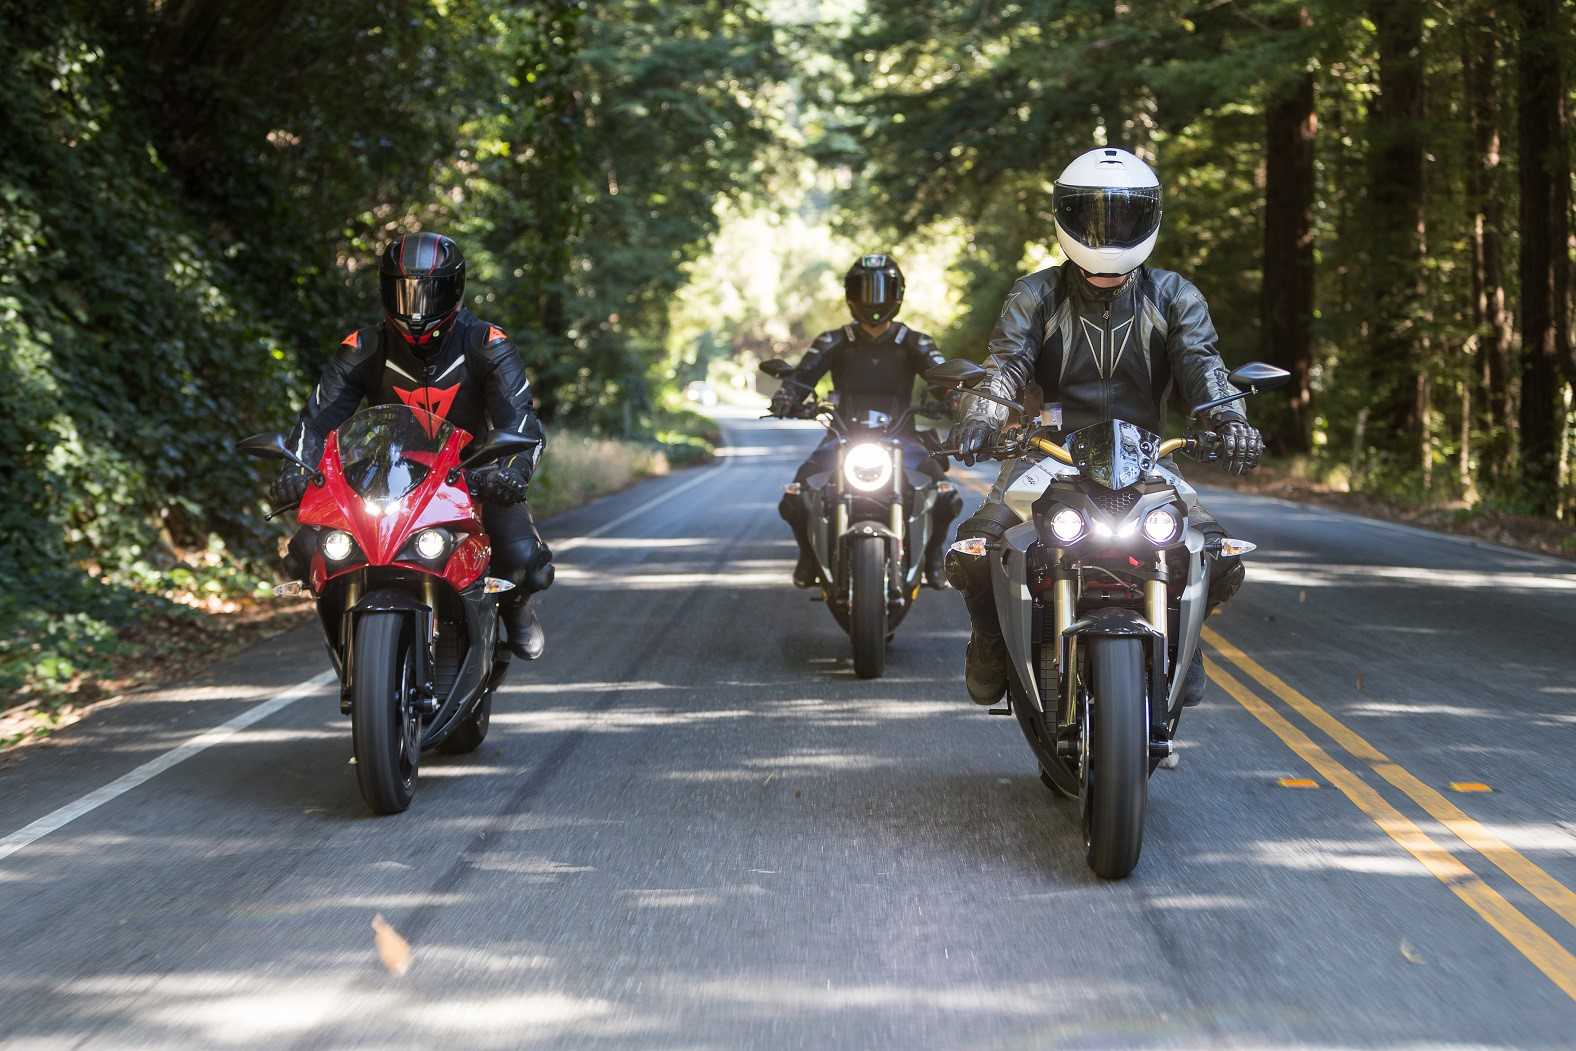 Energica Motorcycles and Hudson Valley Motorcycles.